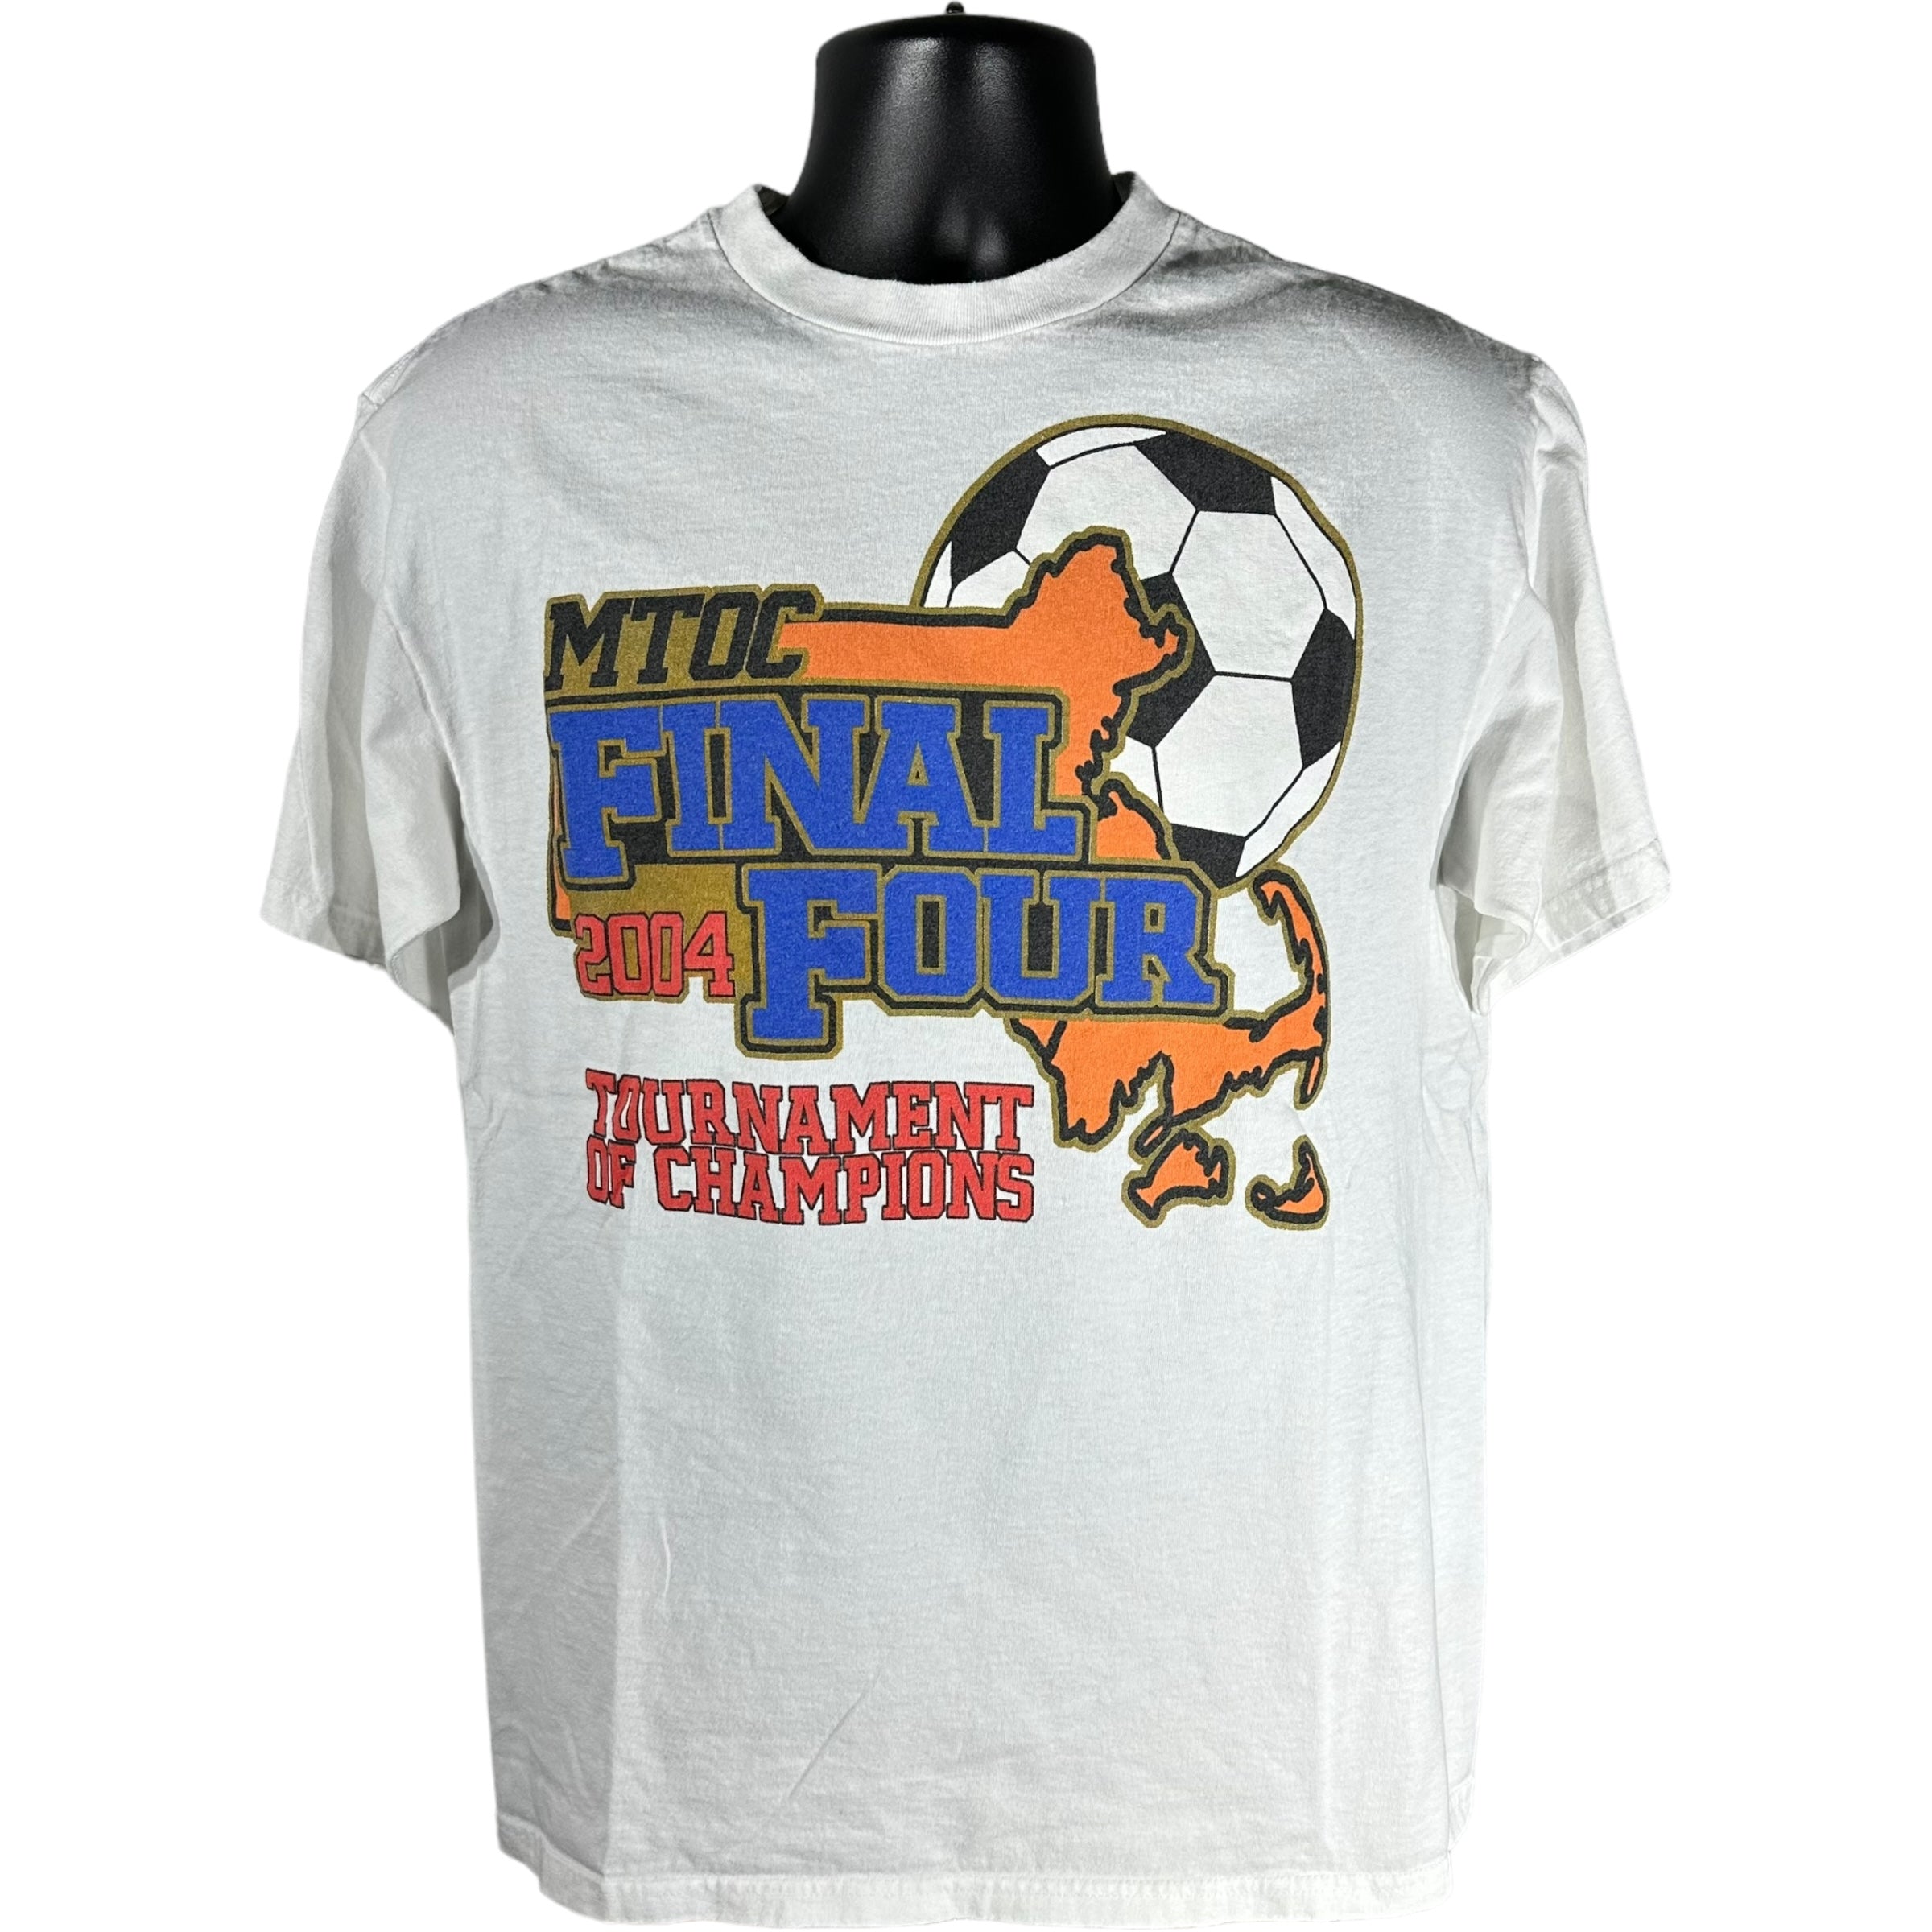 Vintage Adidas MTOC Final Four Tournament Of Champions Tee